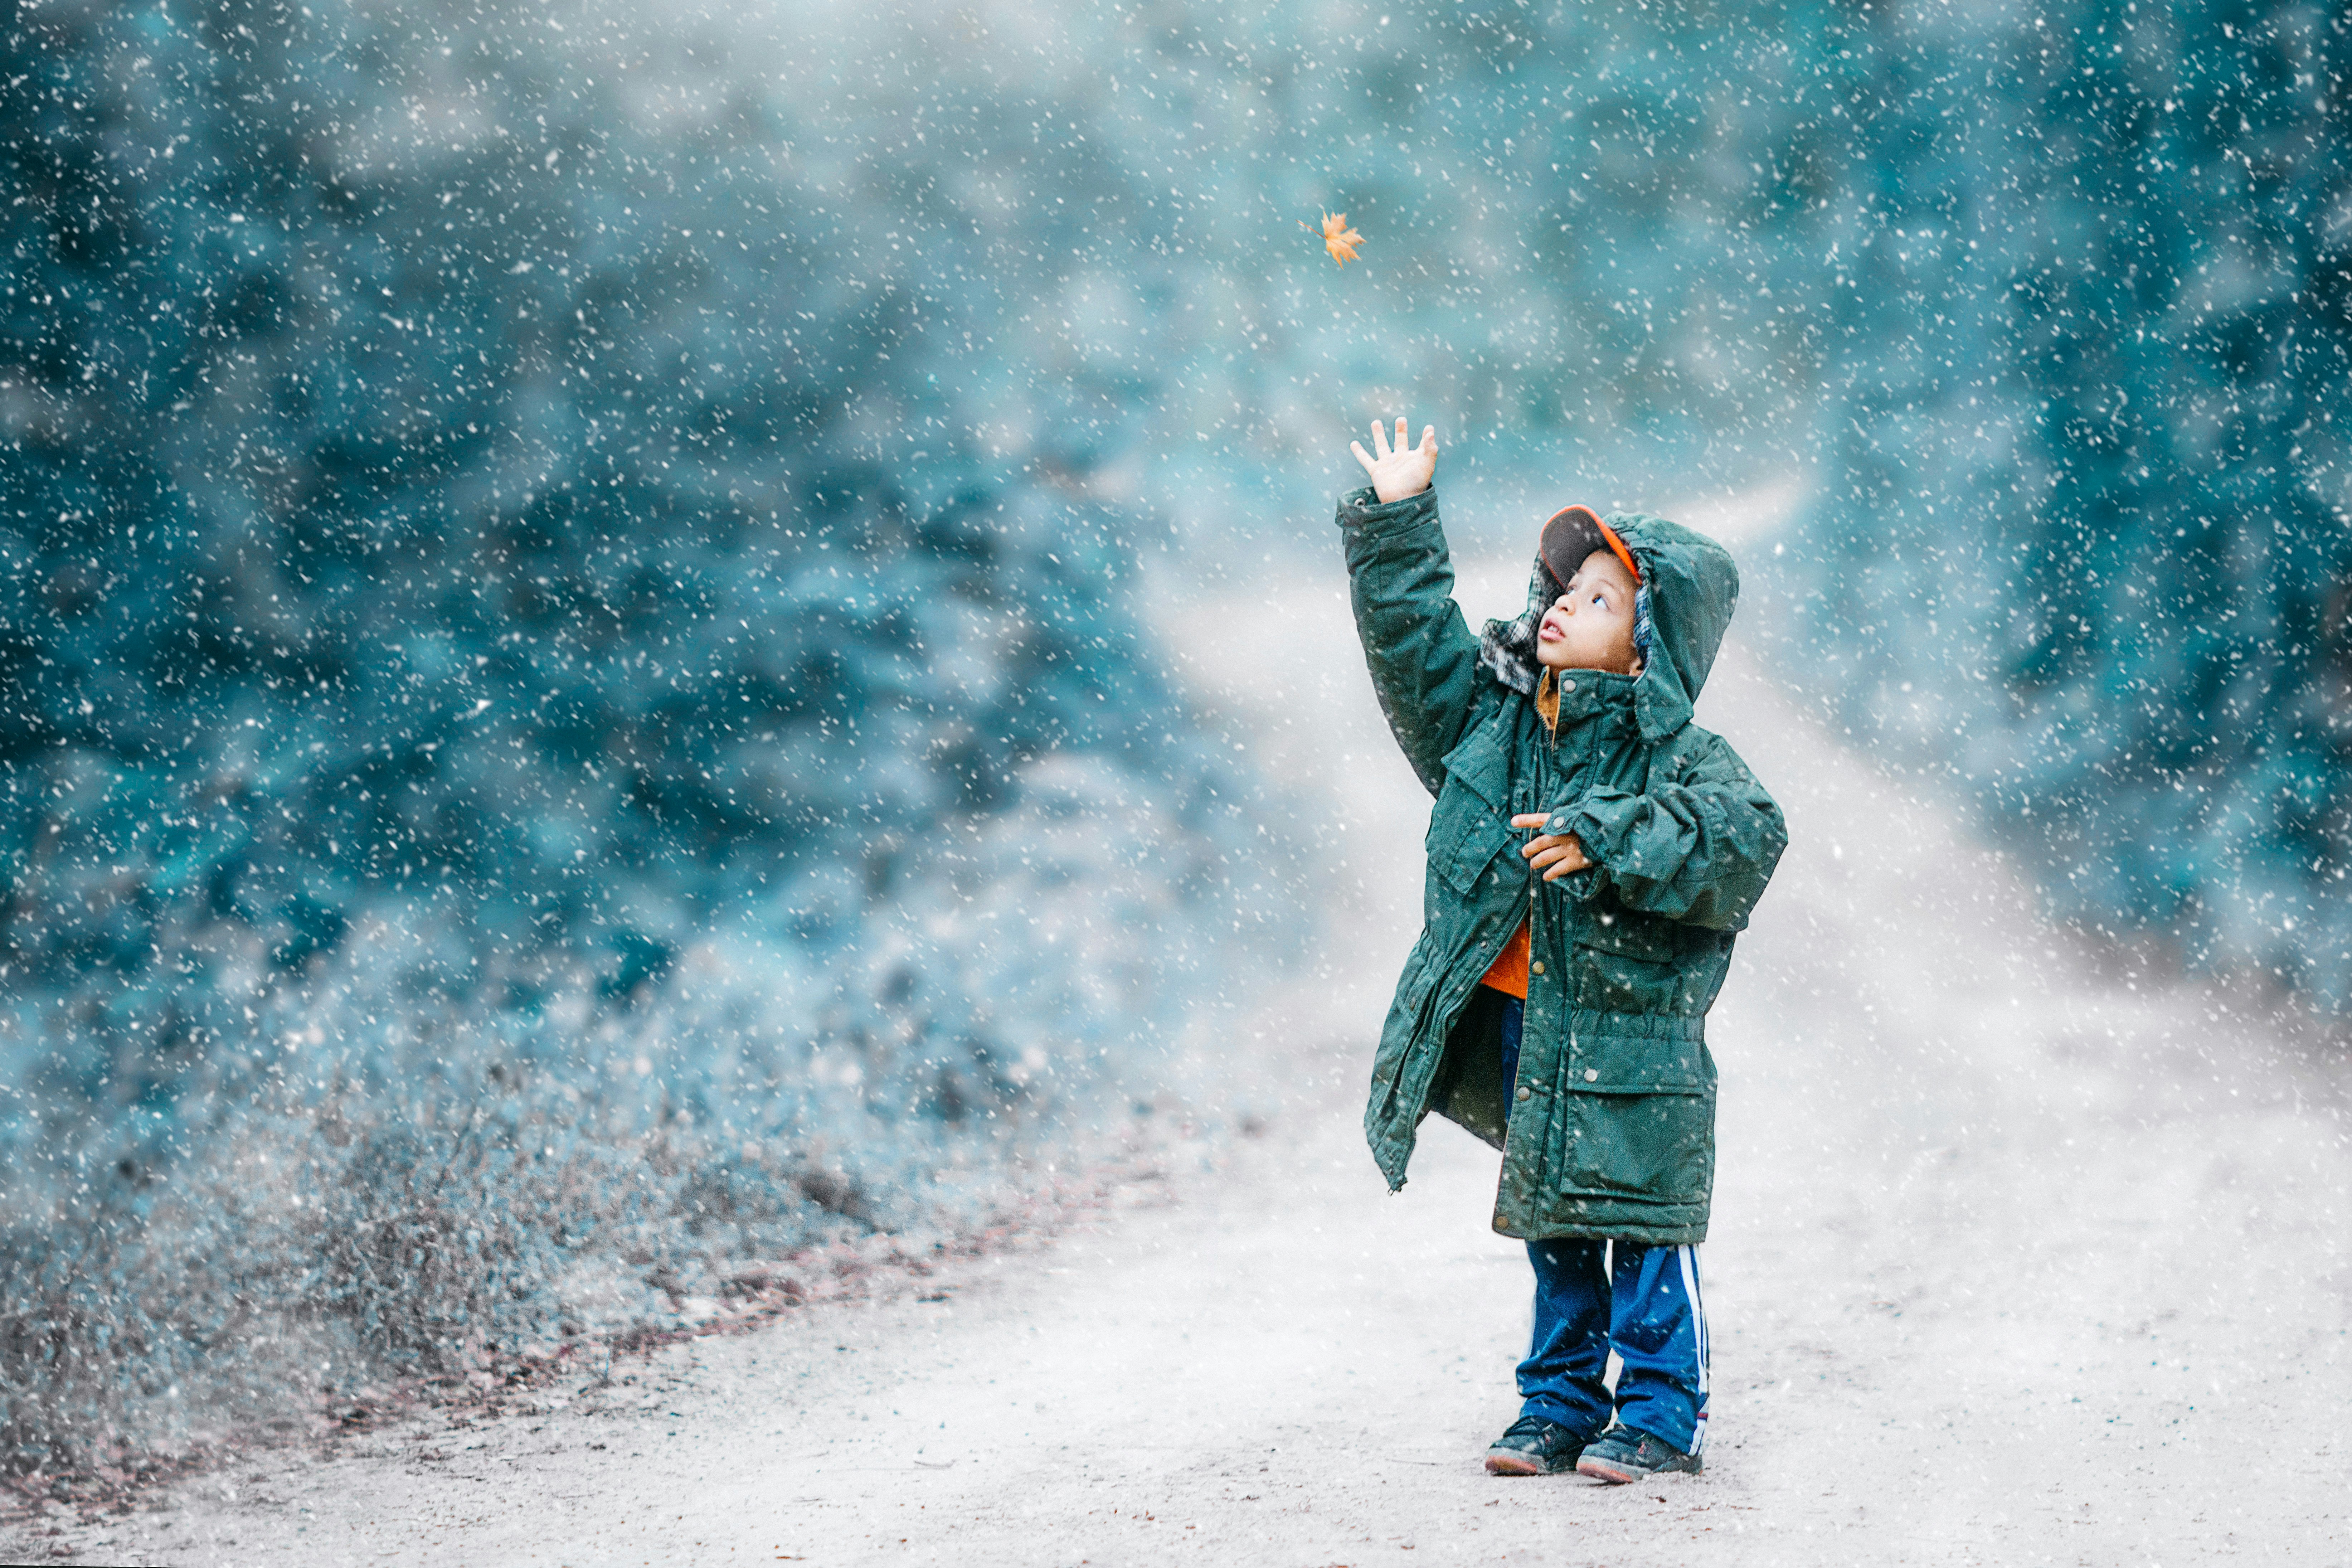 Kids Winter Pictures | Download Free ...